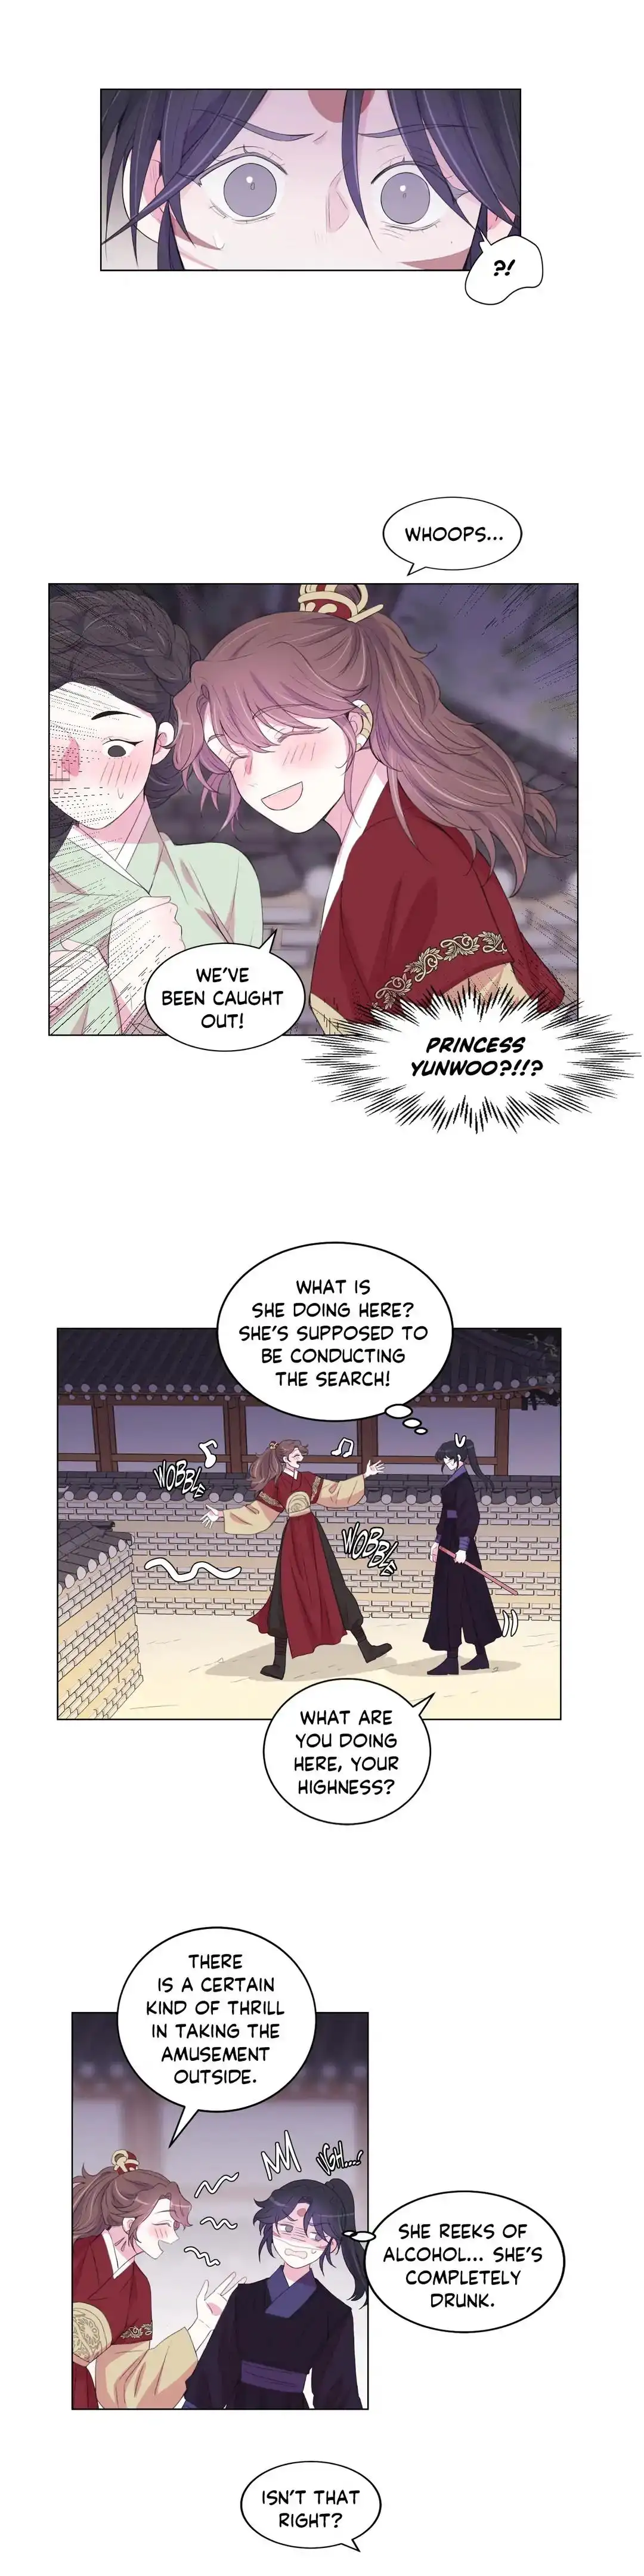 Moonlight Garden - Chapter 73 Page 15